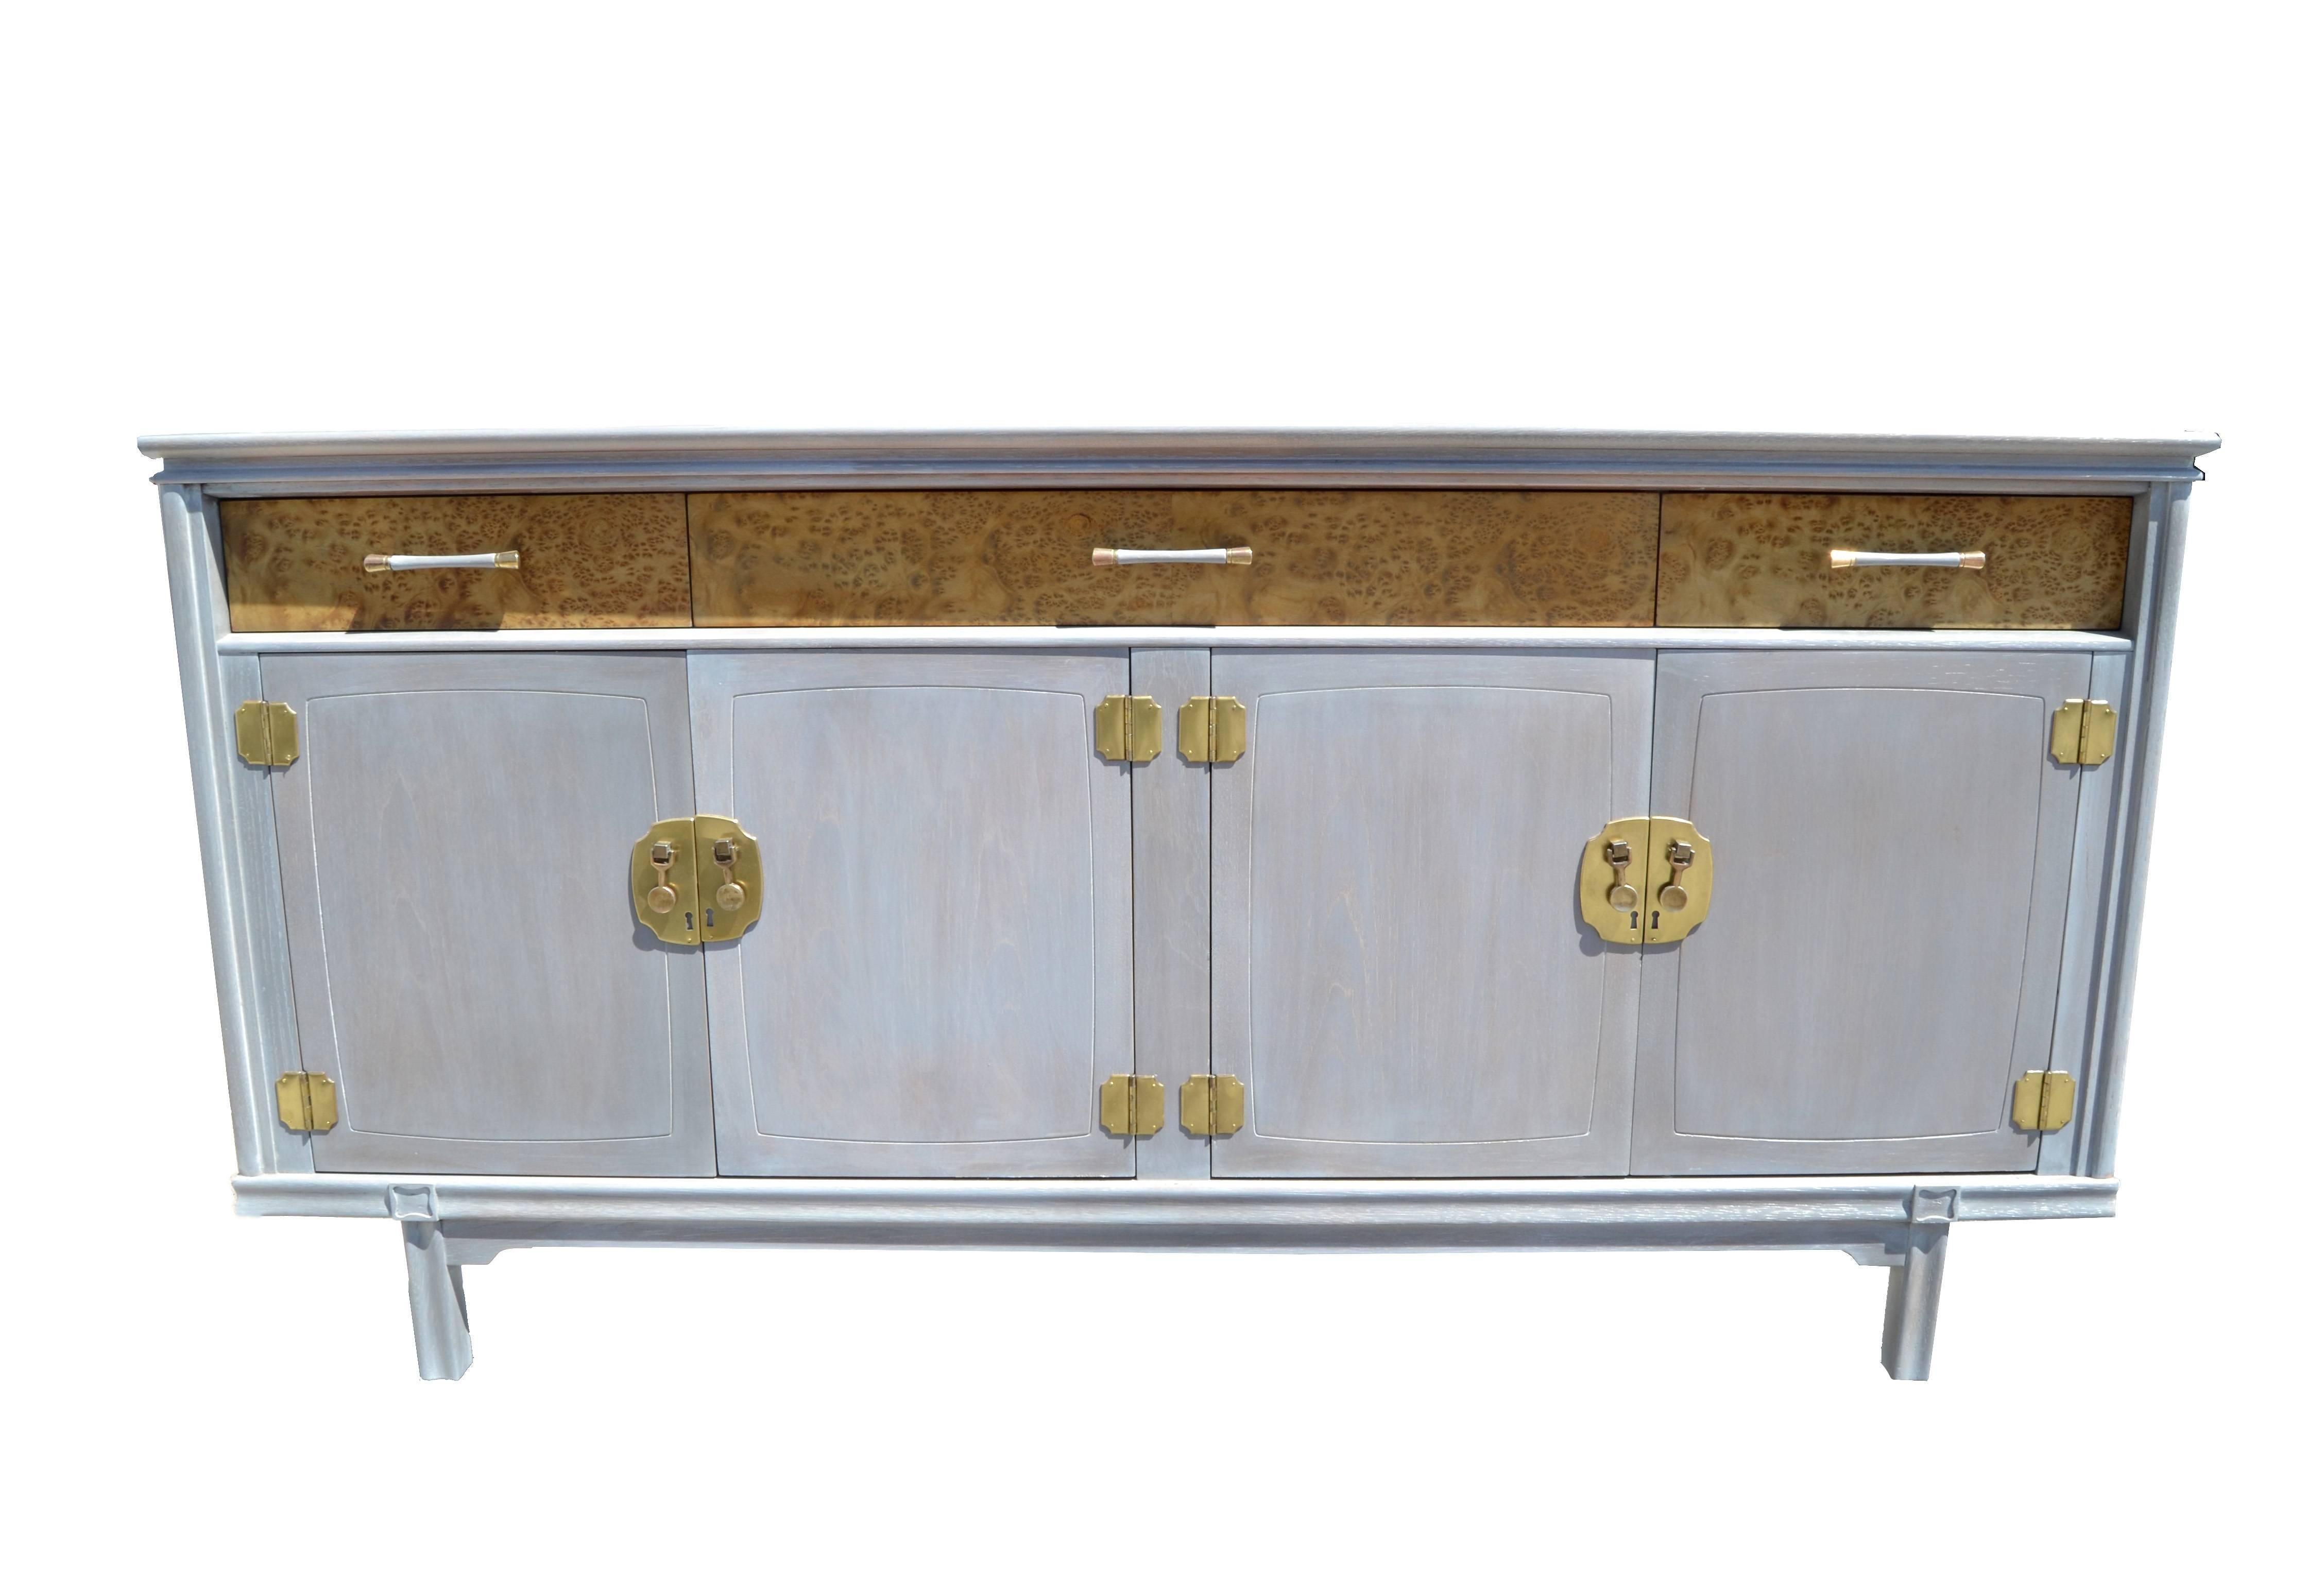 Mid-Century Modern Modernage Furniture Company burl wood and brass credenza in gray ceruse finish.
Features three drawers and two pull doors for lots of Storage Space.
Note the very detailed brass hardware, American Craftsmanship from the